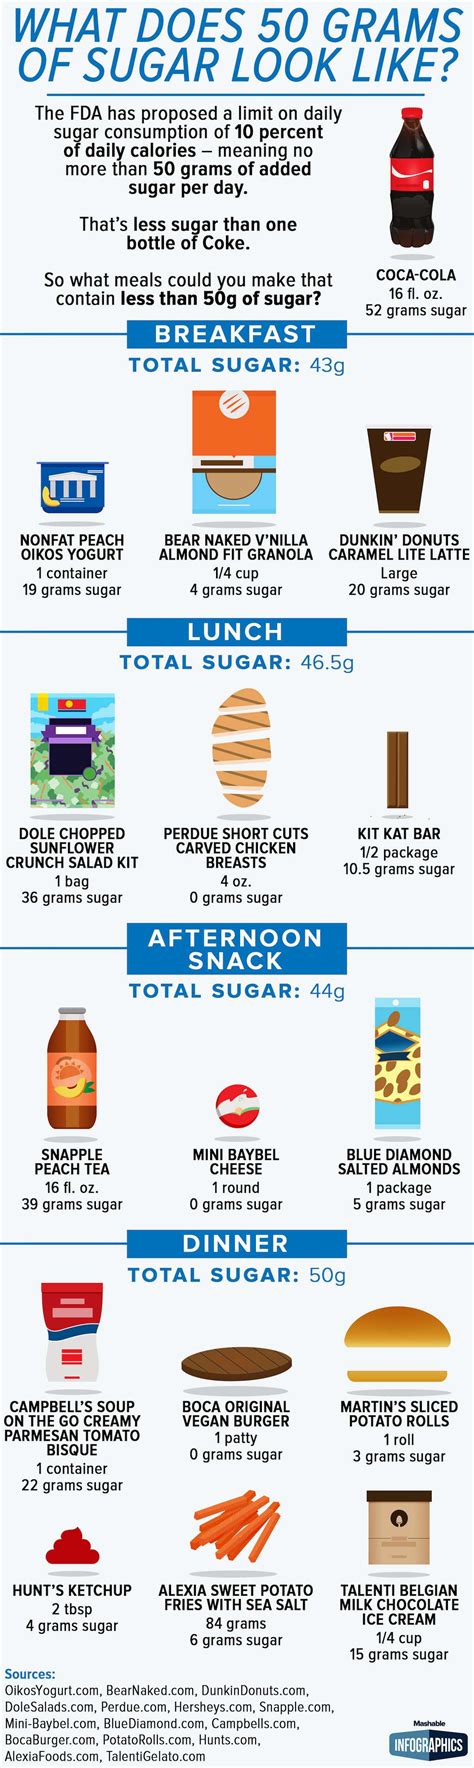 What Does 50 Grams of Sugar Look Like? #infographic #infografía Gram Of ...